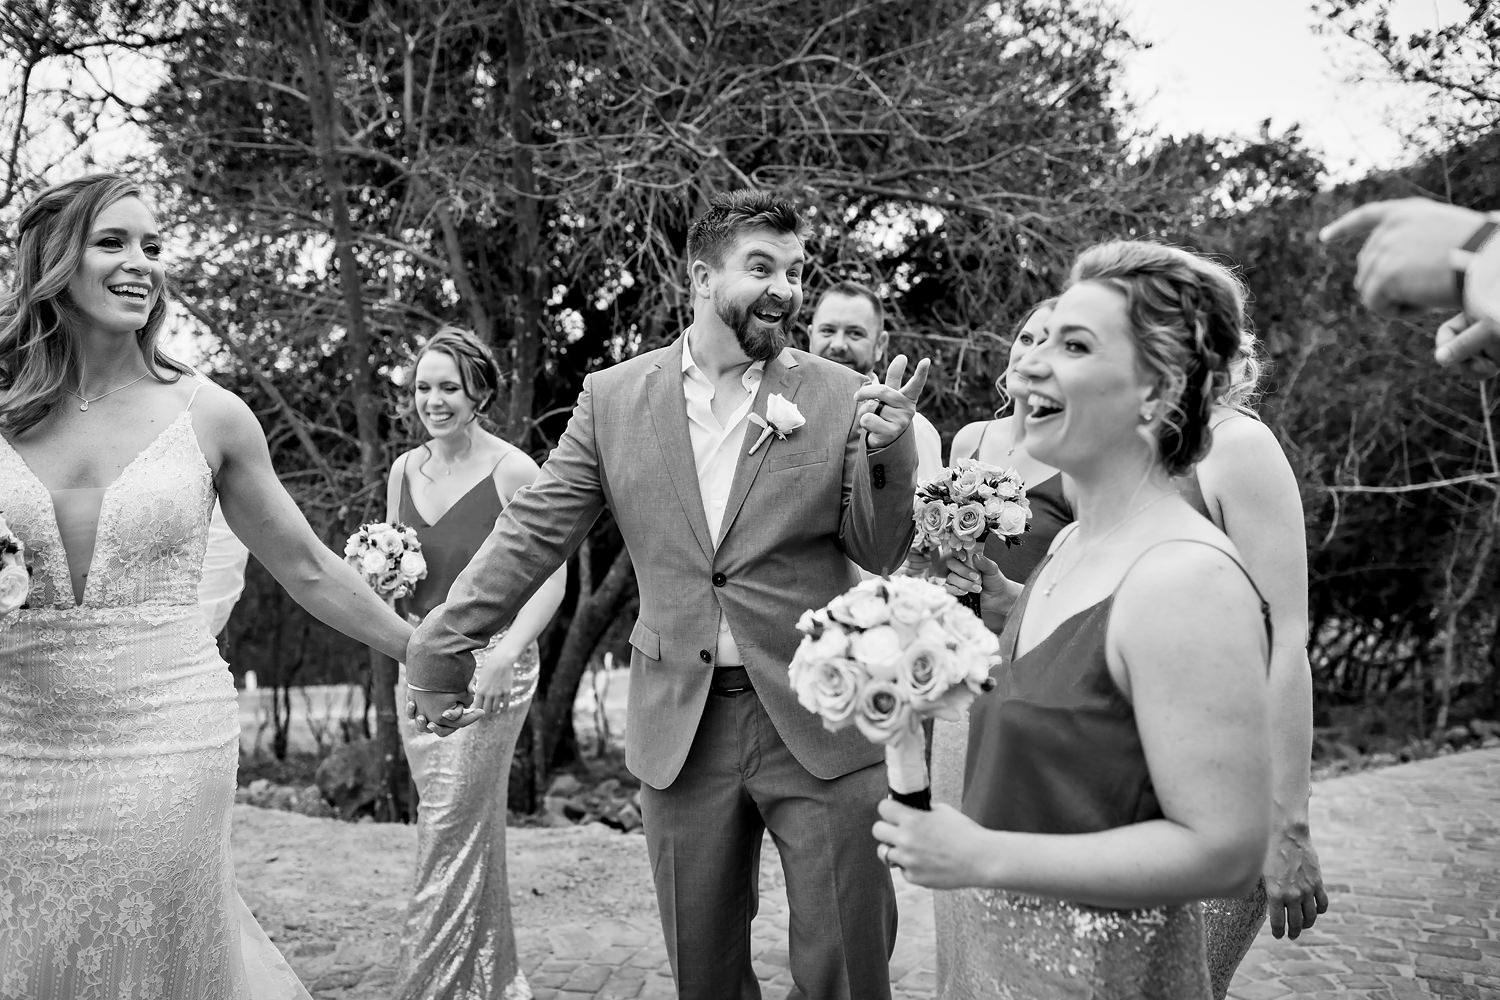 The groom walks and laughs with members of the bridal party in this natural black and white photograph by wedding photographer in South Africa, Niki M Photography